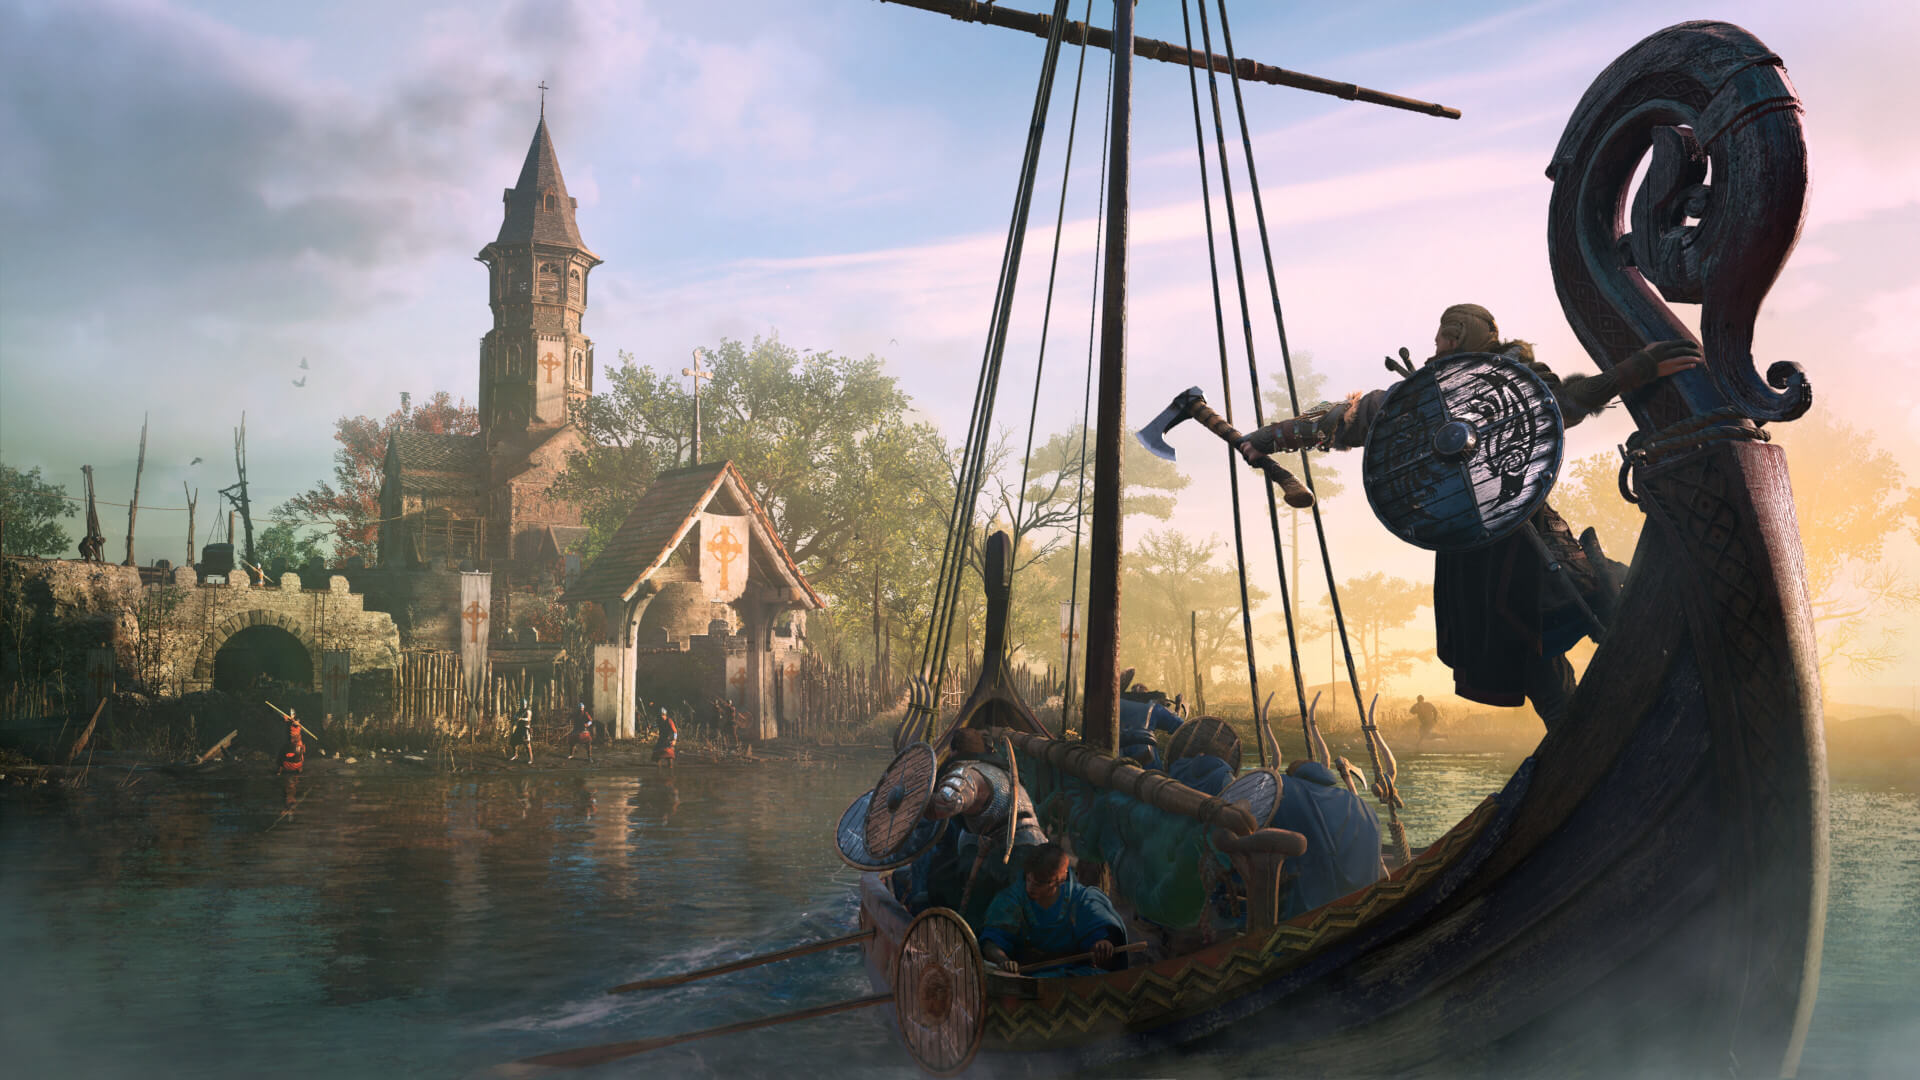 Eivor pointing towards a church, presumably to ransack it, in Assassin's Creed Valhalla